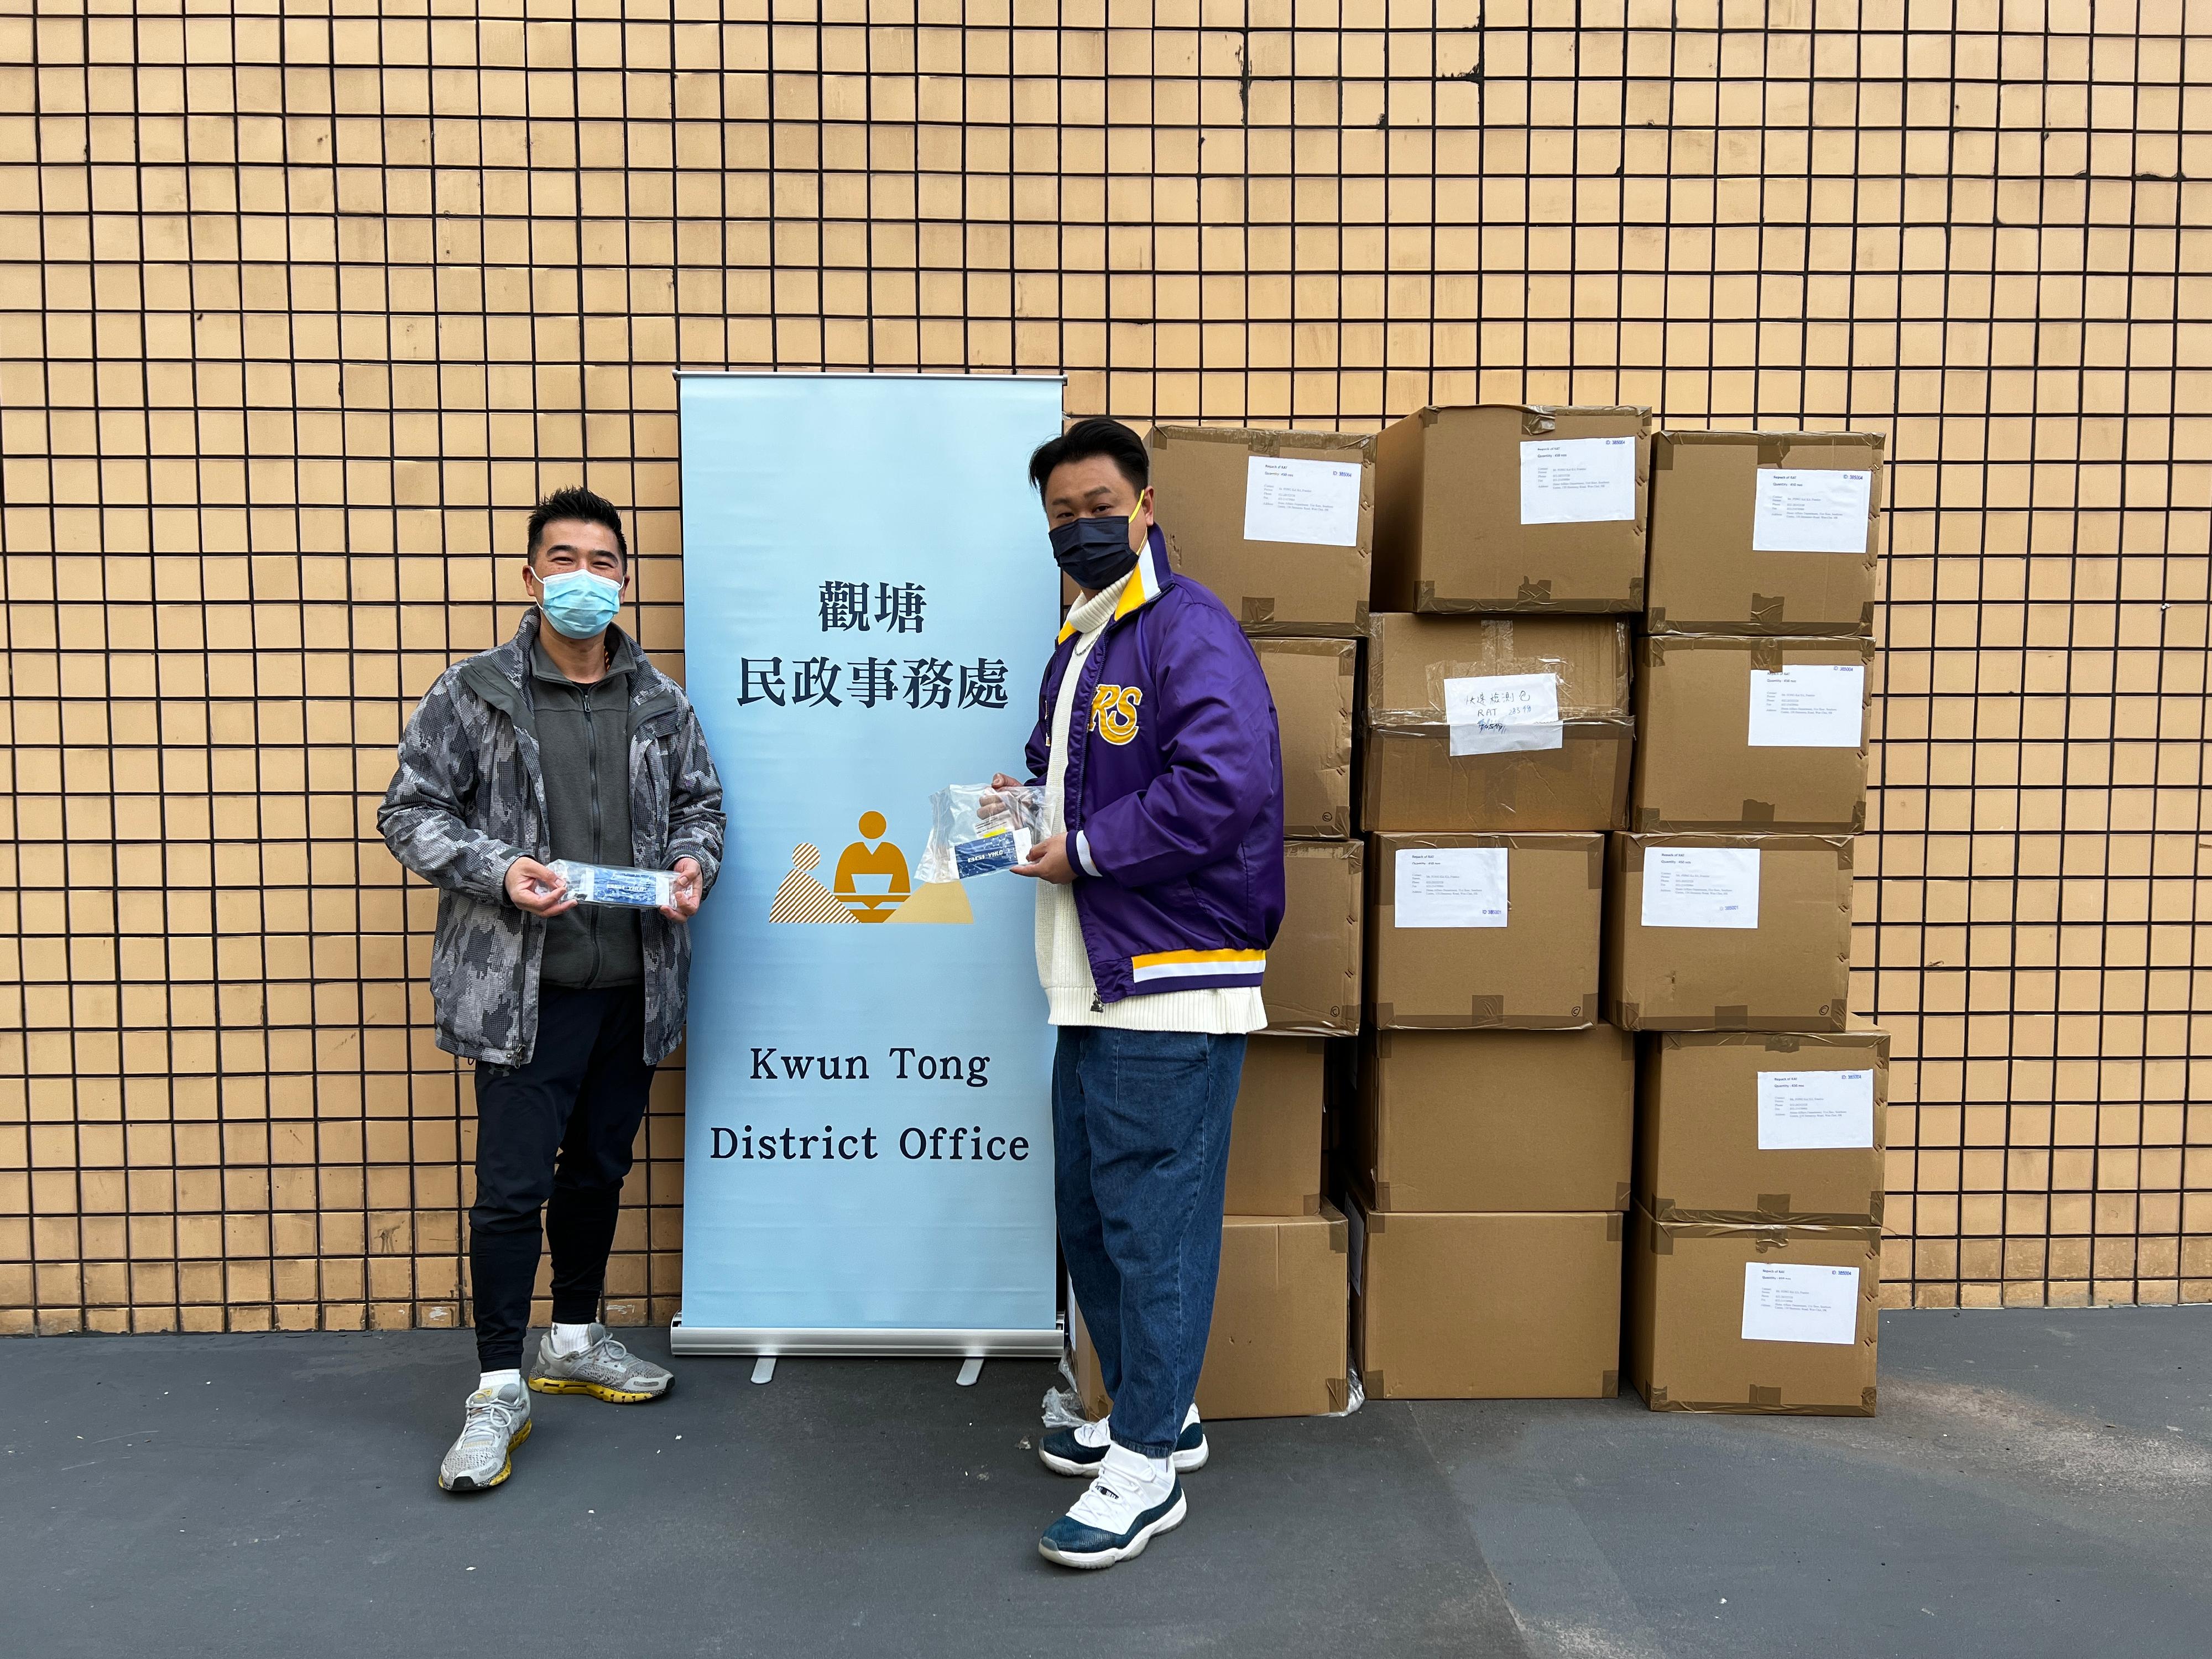 The Kwun Tong District Office today (February 24) distributed COVID-19 rapid test kits to households, cleansing workers and property management staff living and working in Sin Tat House, Shing Tat House and Him Tat House for voluntary testing through the property management company of On Tat Estate.

